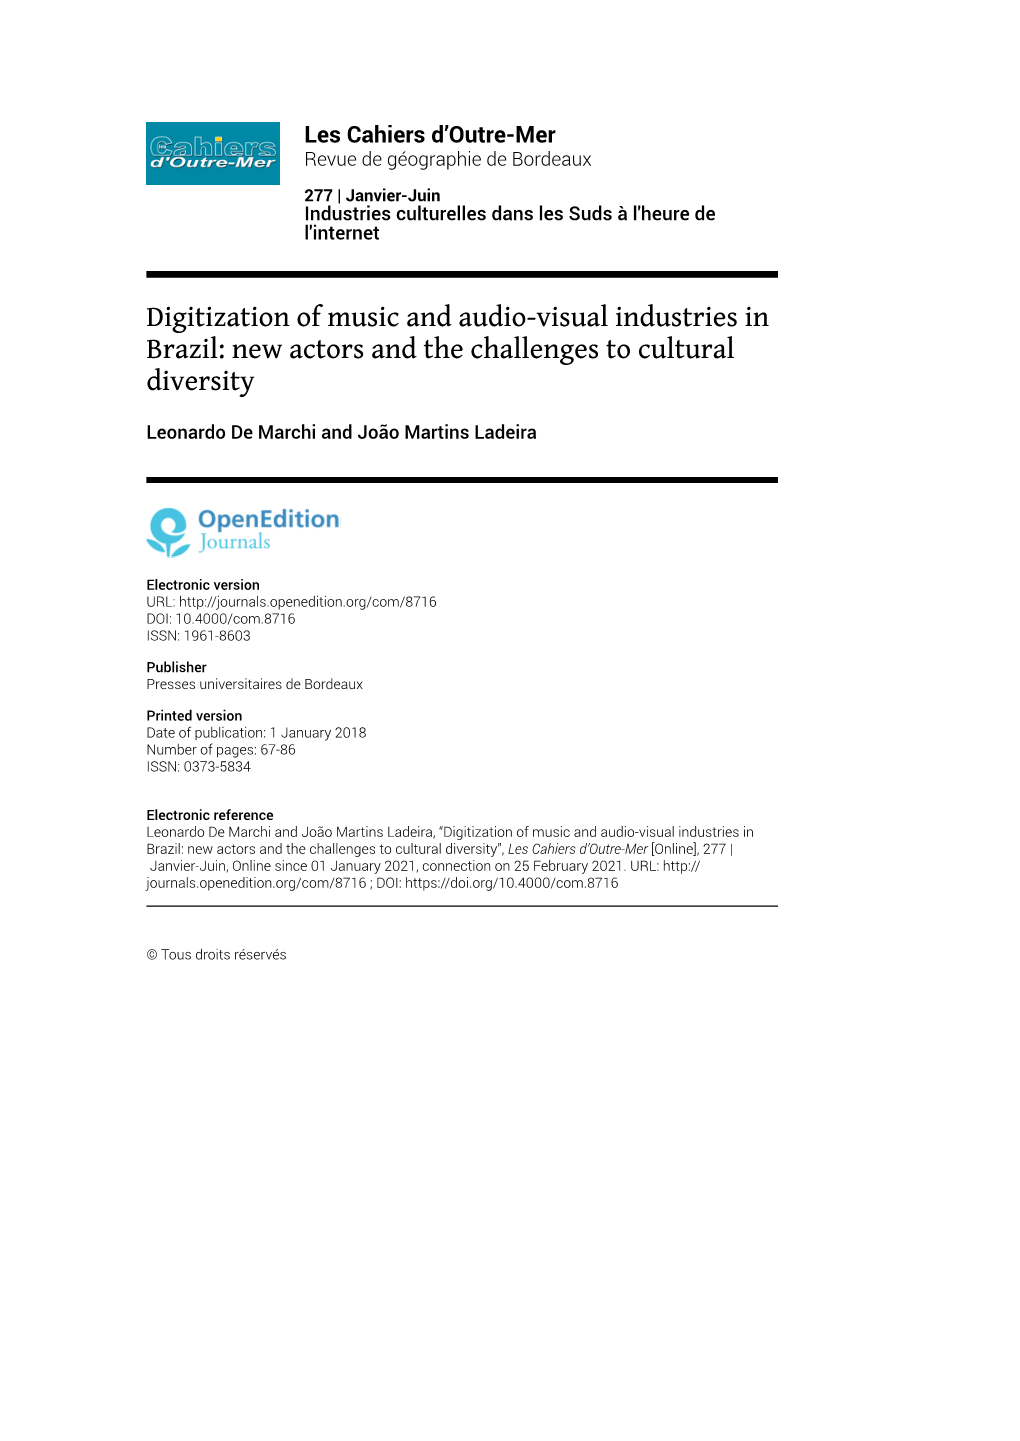 Digitization of Music and Audio-Visual Industries in Brazil: New Actors and the Challenges to Cultural Diversity